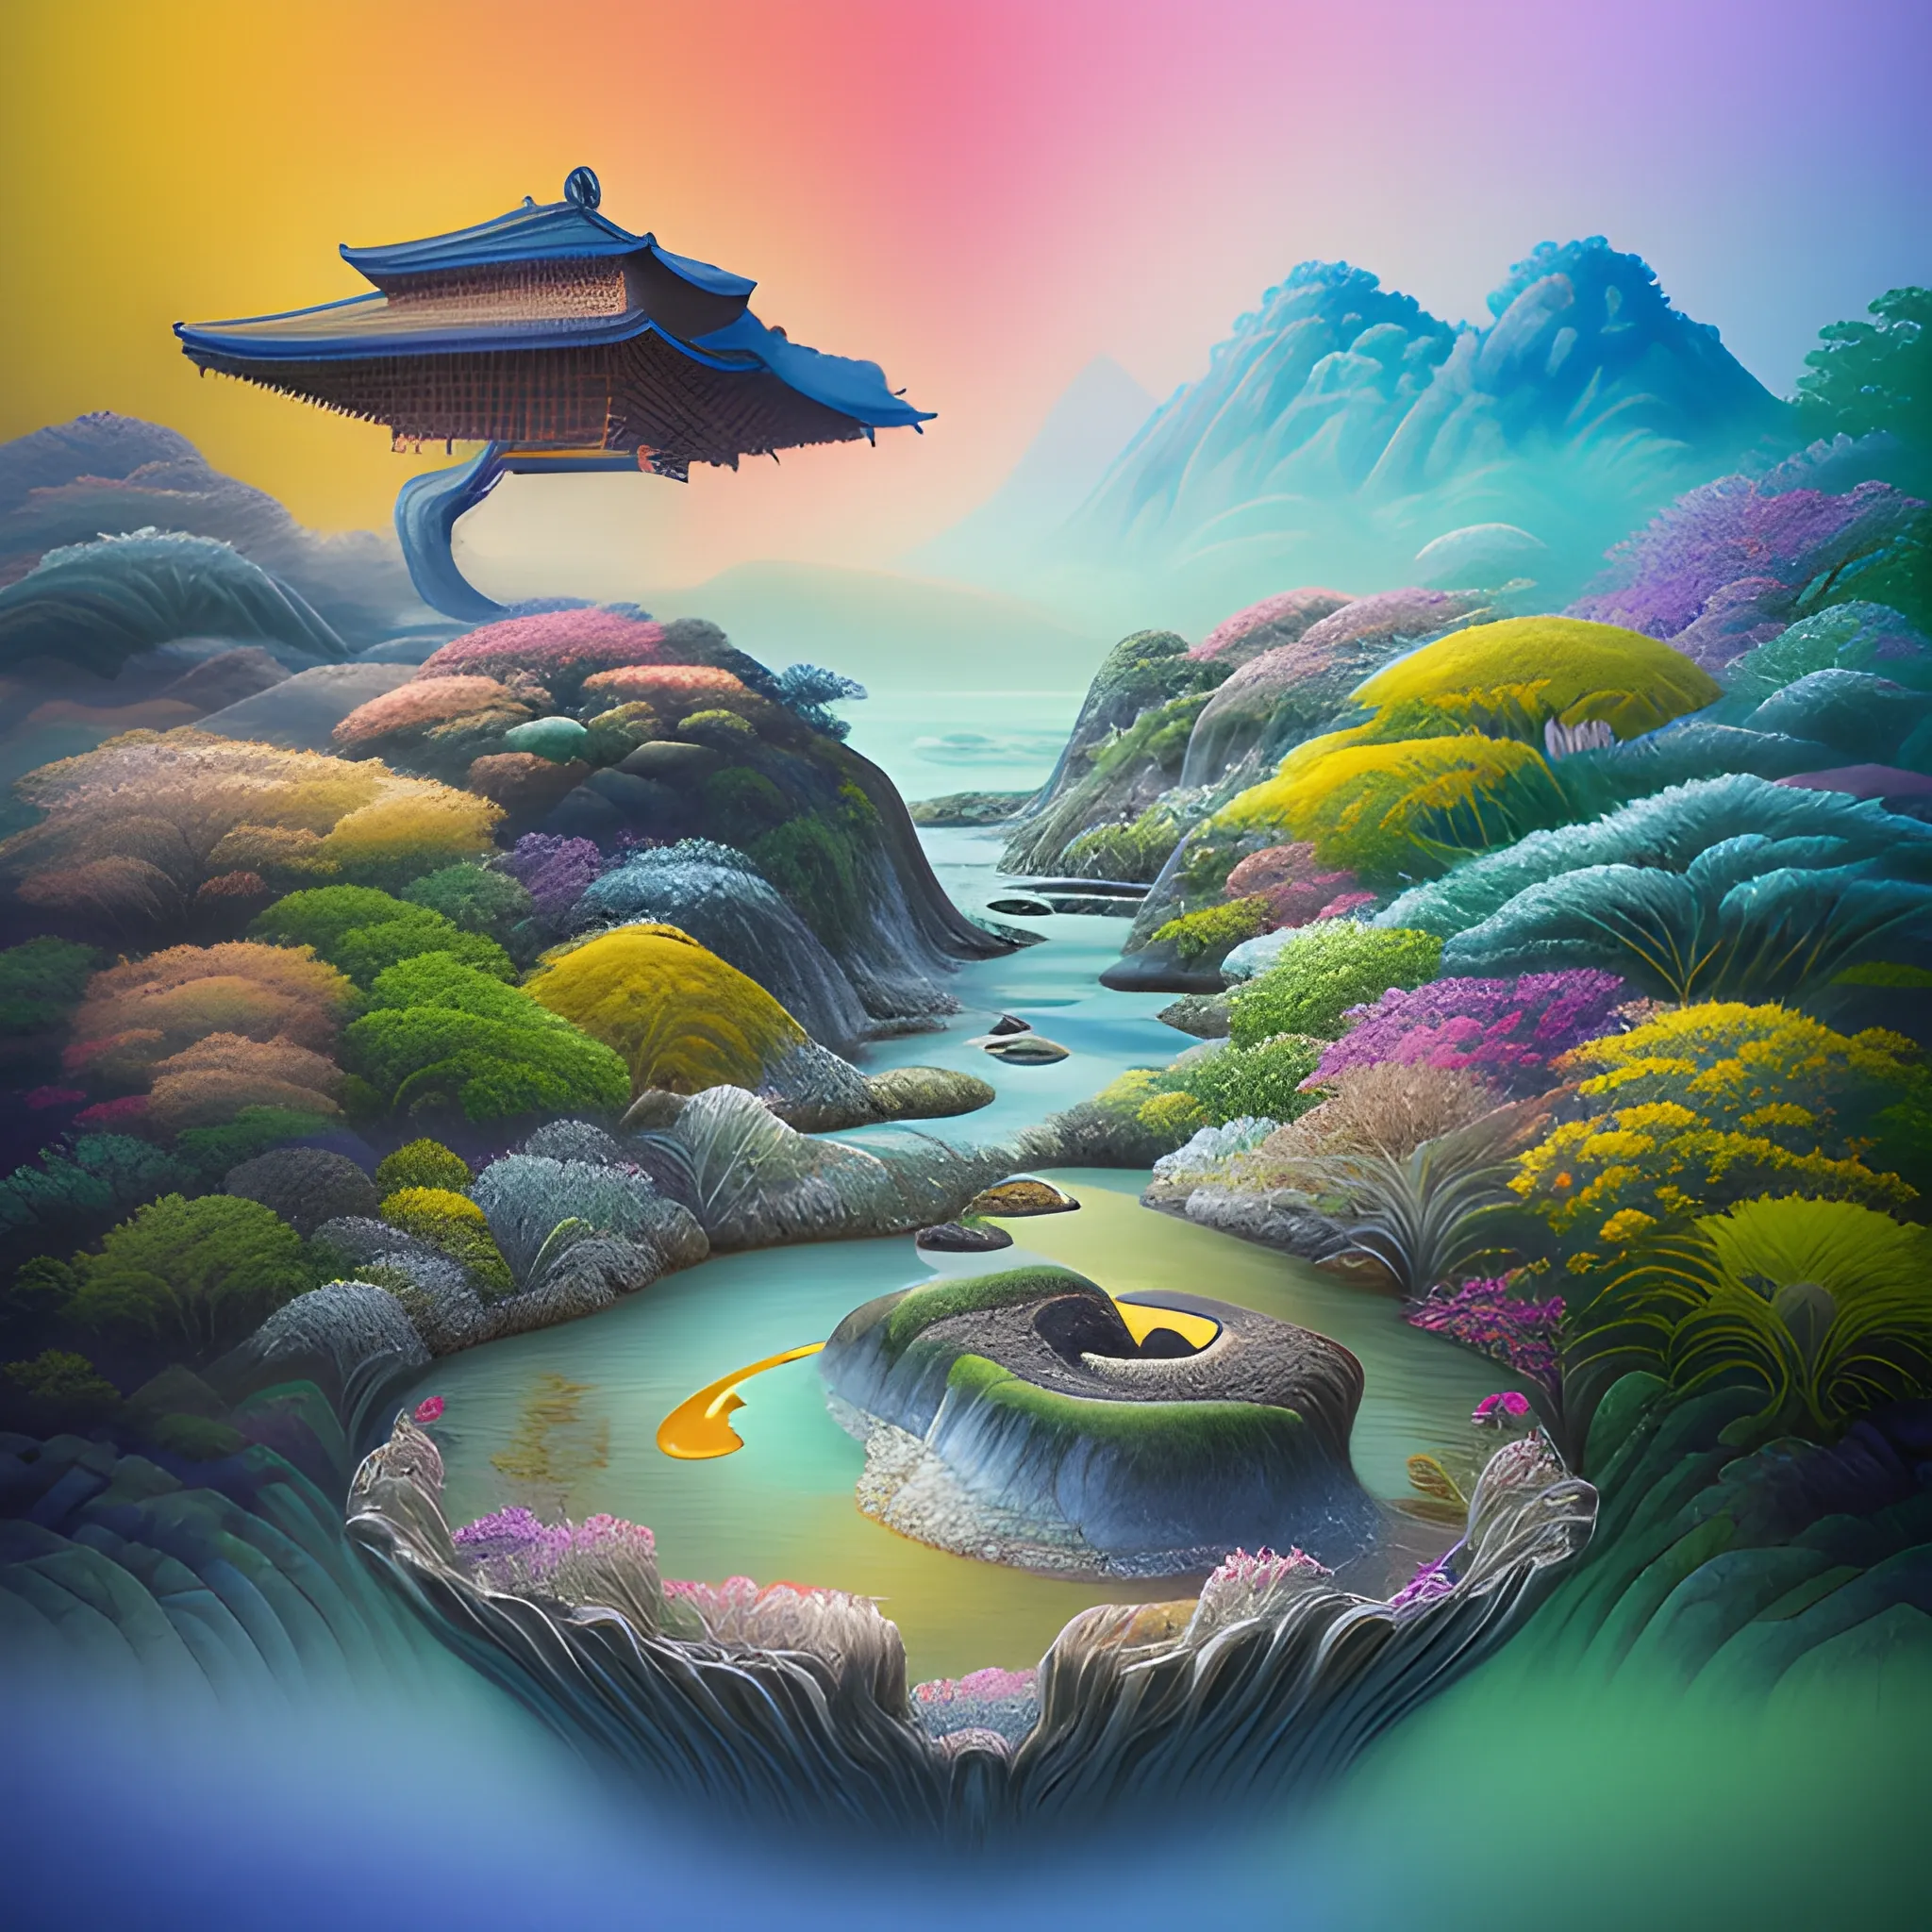 (by Ananta Mandal (and Andrew Biraj:0.5)), (in the style of nihonga), Style: Abstract, Medium: Digital illustration, Subject: A Guanshiyin Pusa in the middle of picture, An otherworldly landscape with floating islands, cascading waterfalls, and vibrant flora and fauna. Camera Angle: Overhead shot capturing the vastness and intricate details of the scene. The colors are saturated, and the lighting creates a warm and ethereal atmosphere. The painting is highly detailed, with every brushstroke capturing the complexity of the imaginary world., (high quality), (detailed), (masterpiece), (best quality), (highres), (extremely detailed), (8k), seed:792315689, Pencil Sketch, Water Color